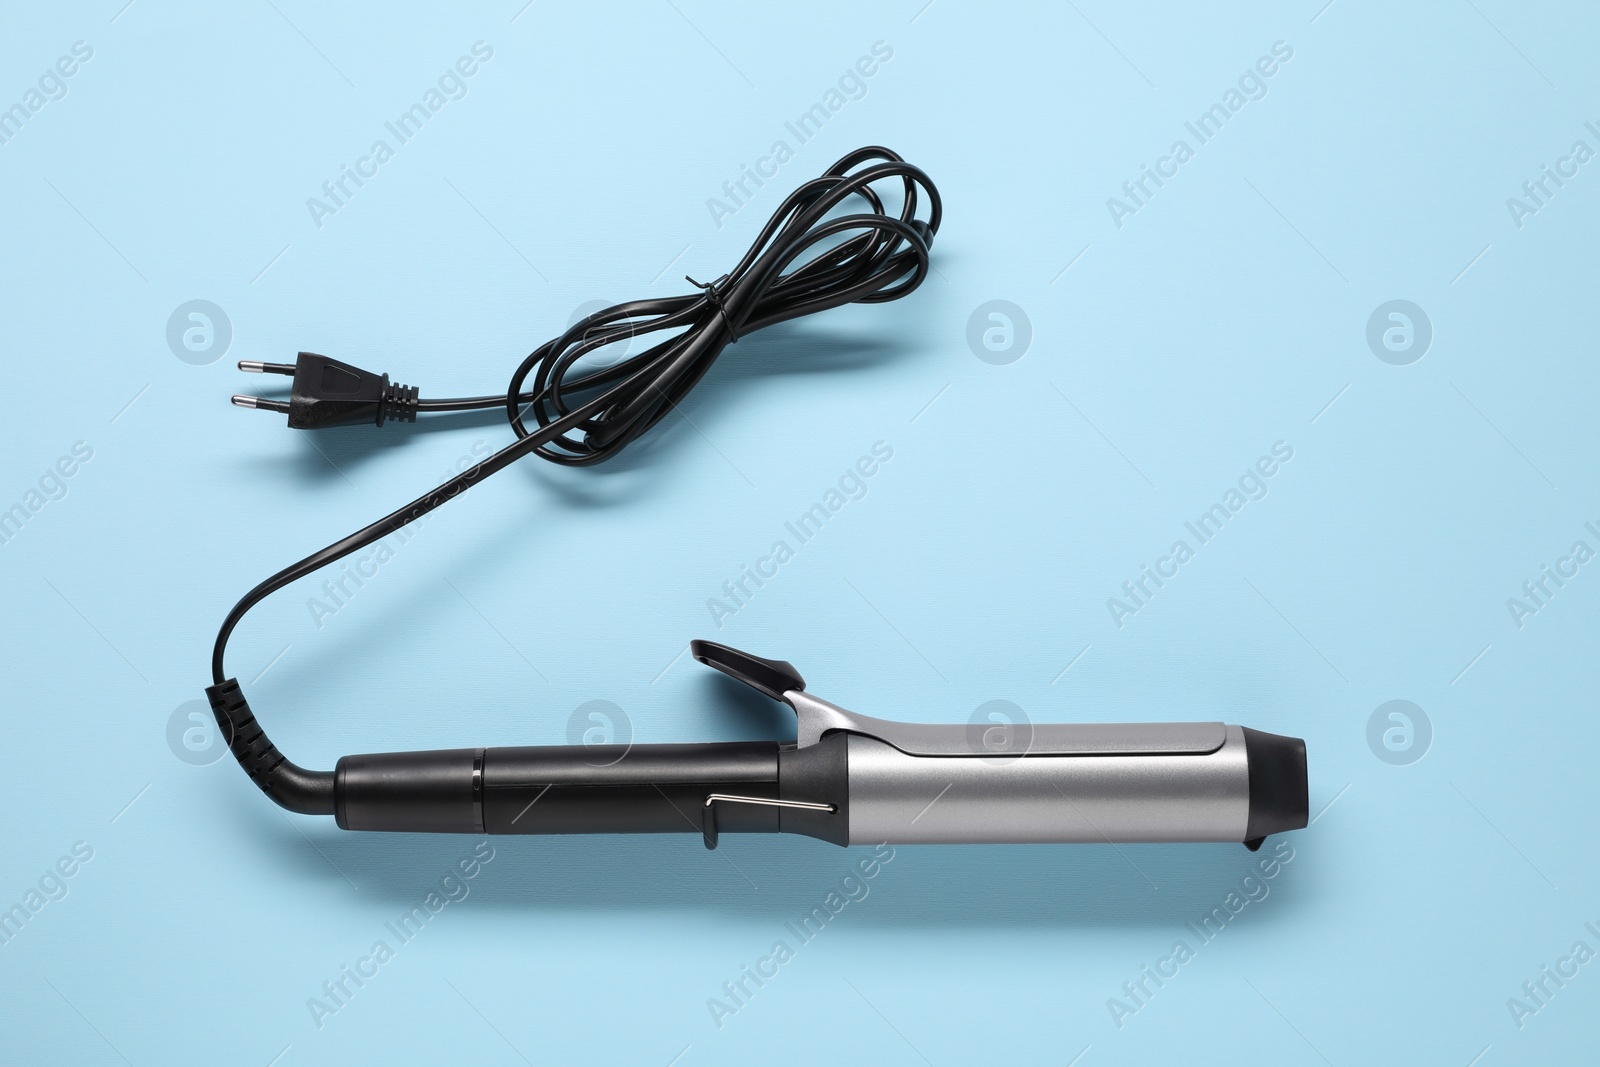 Photo of One curling iron on light blue background, top view. Hair styling appliance